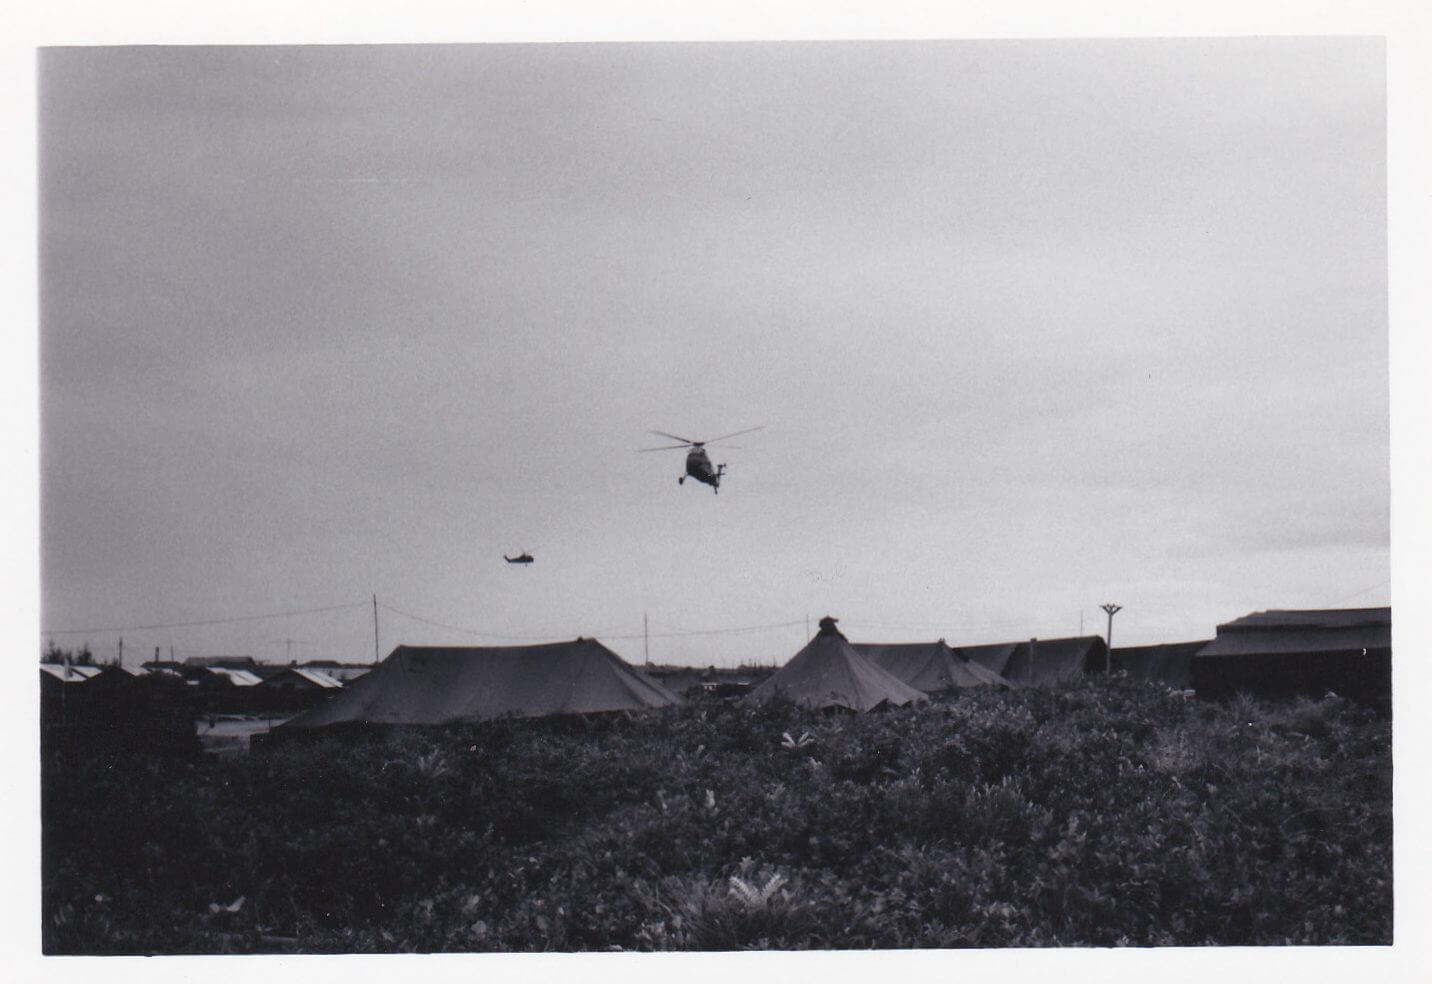 Choppers flying over a village.